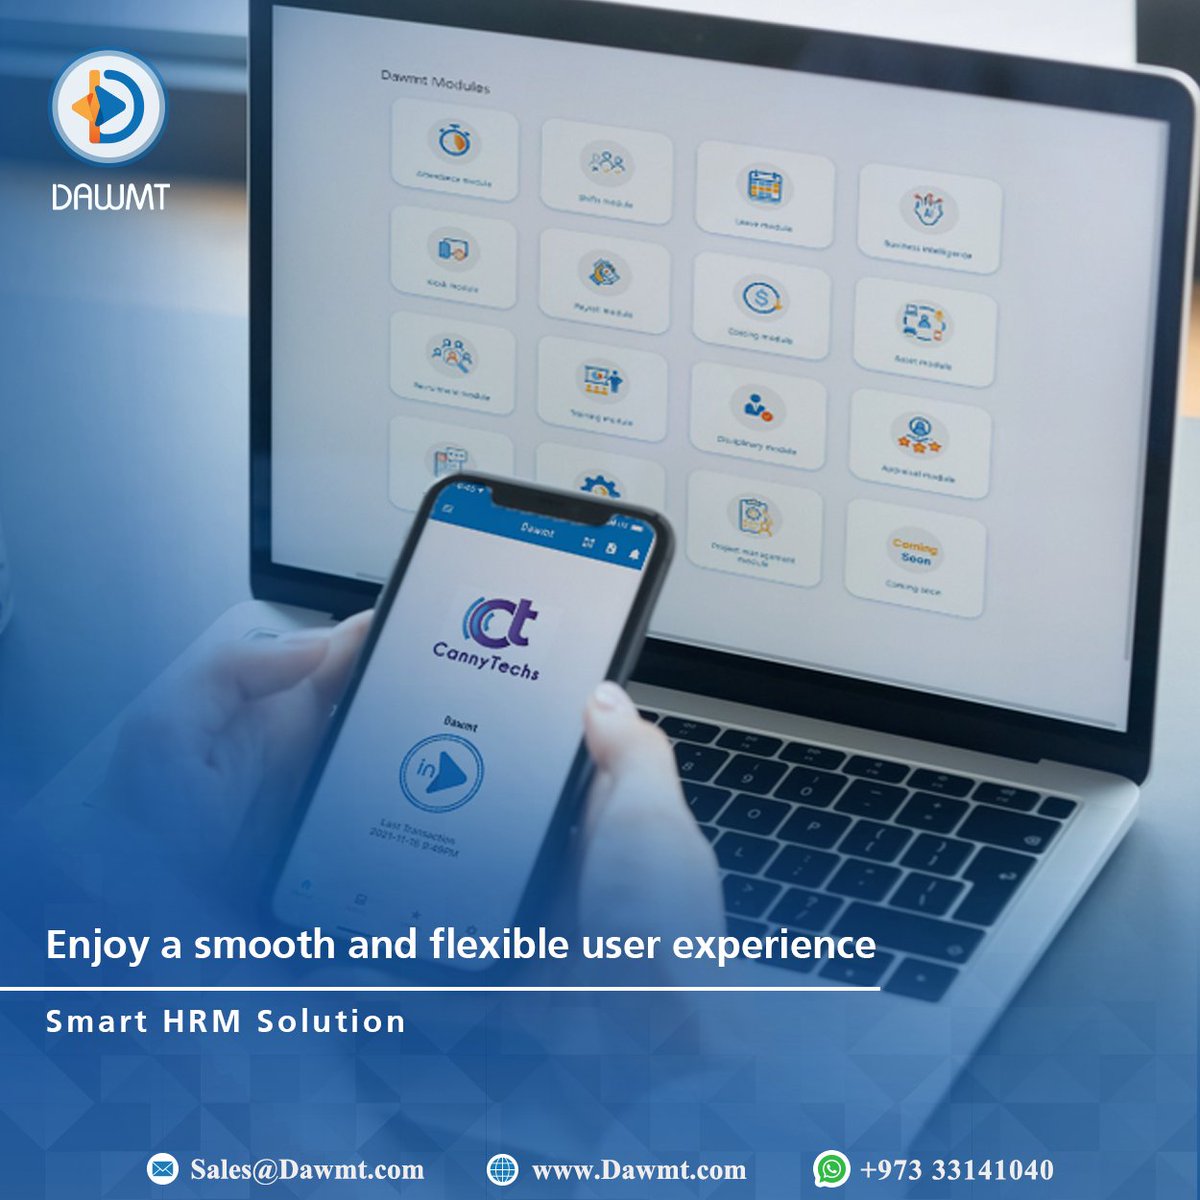 Enjoy a smooth and flexible user experience on all mobile devices and computers with the Dawmt HRM Solution.
.
.

#dawmt #hr #hrsystem  #hrsloutions #hrmanagement #hrmanager #hr_pictures #business #onlinebusiness #smallbusiness #bussinesstips #hrbusinesspartner #bahrain #bahraini